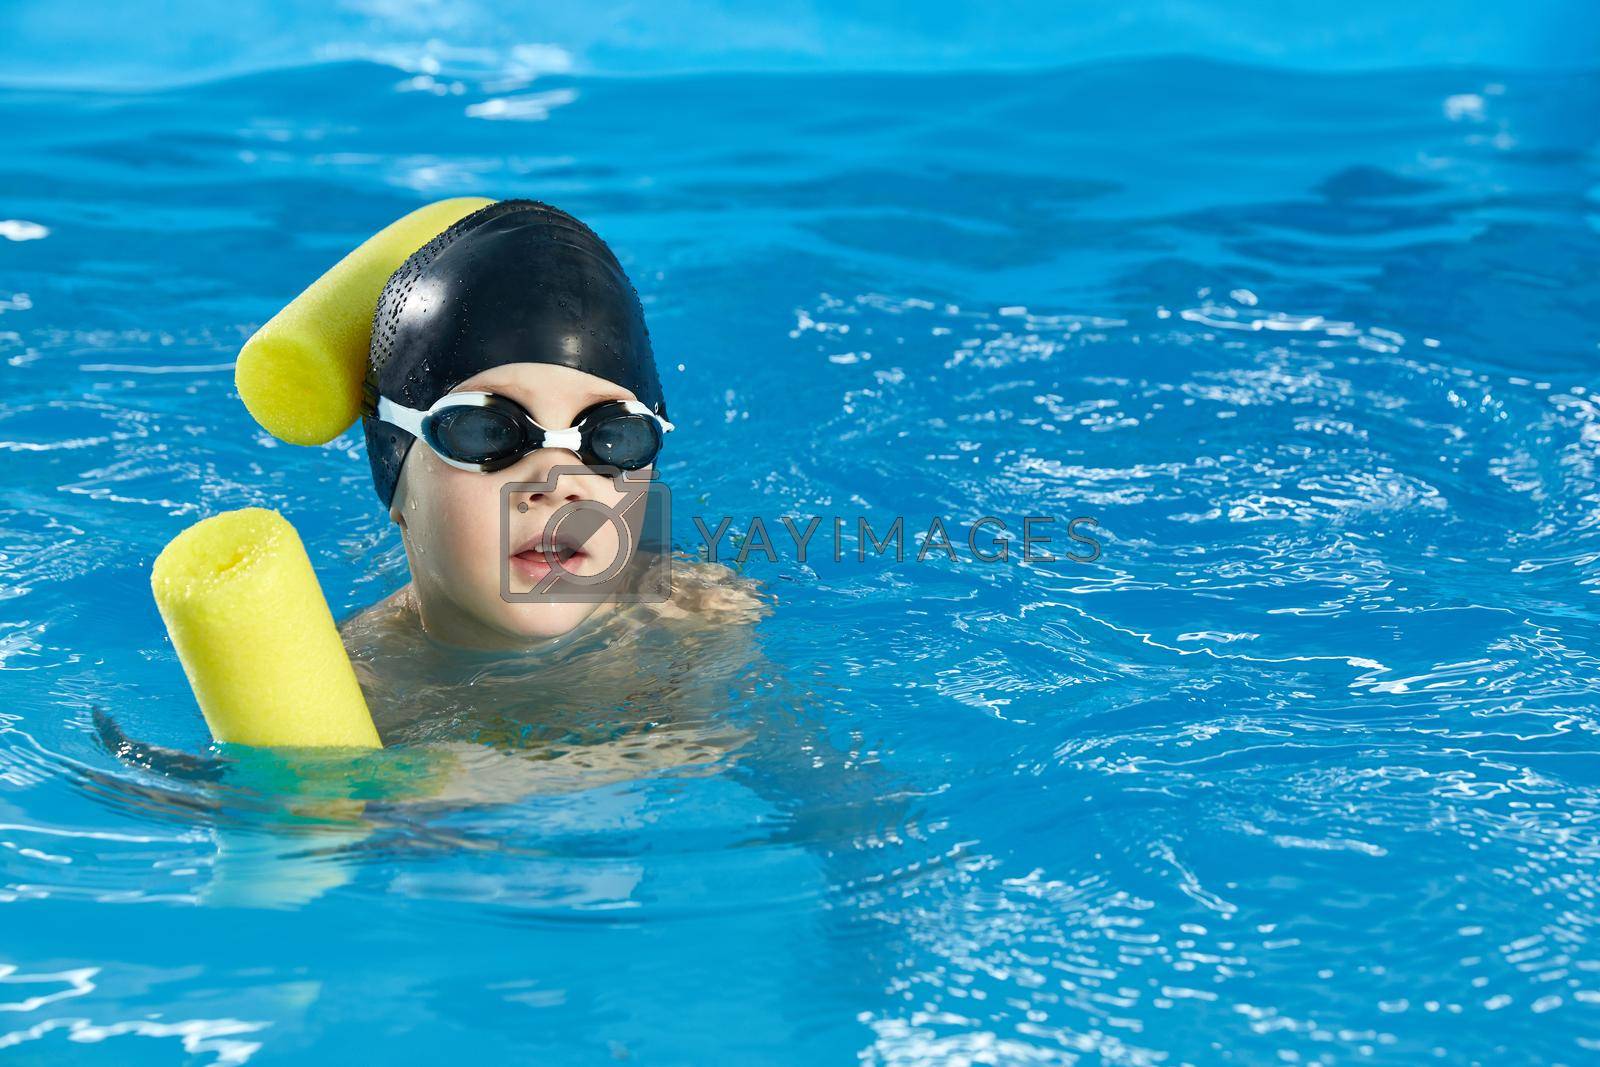 Royalty free image of Preschool boy learning to swim in pool with foam noodle by Mariakray